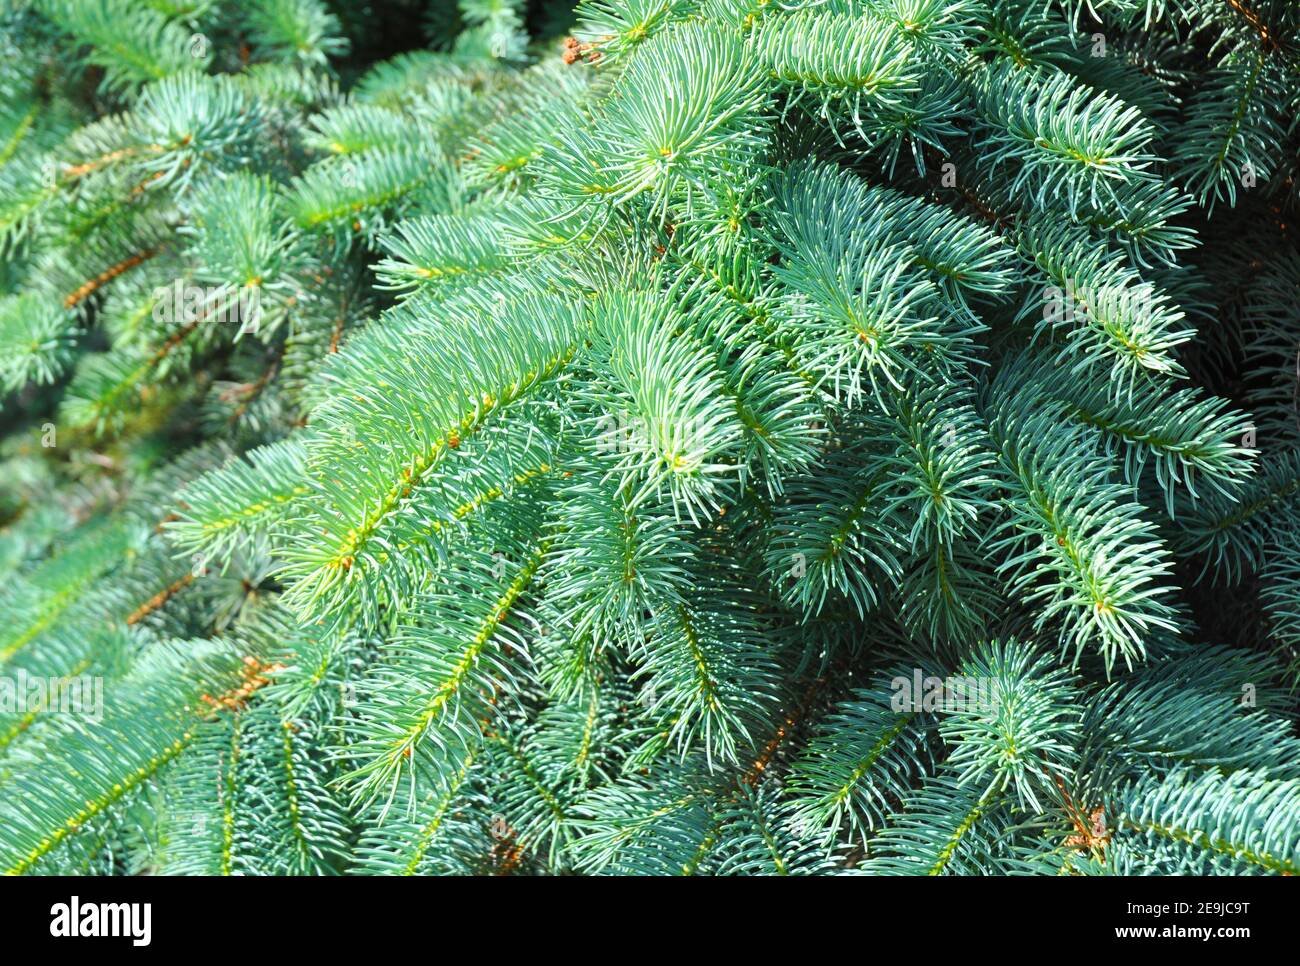 Blue spruce, green spruce, white spruce, Colorado spruce or Colorado blue spruce, with the scientific name Picea pungens, is a species of spruce tree. Stock Photo